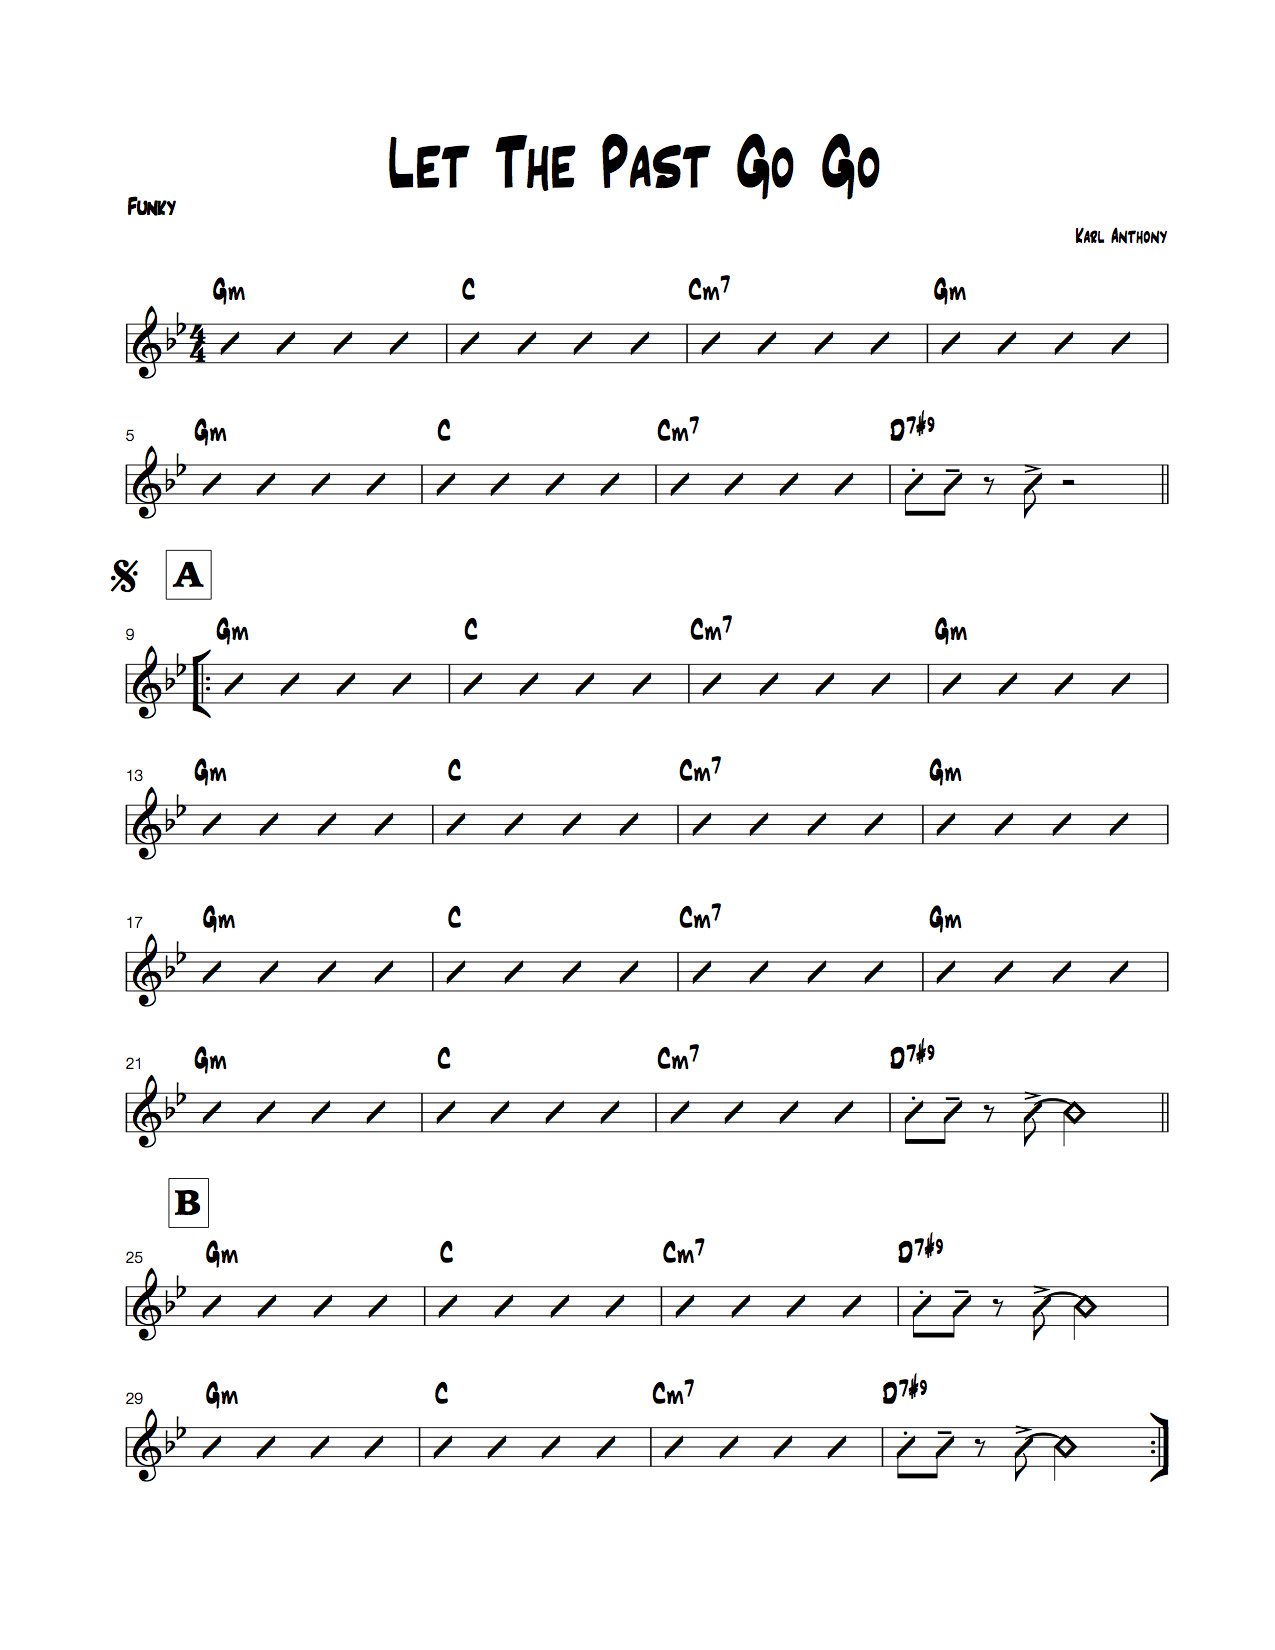 Let It Go Chord Chart